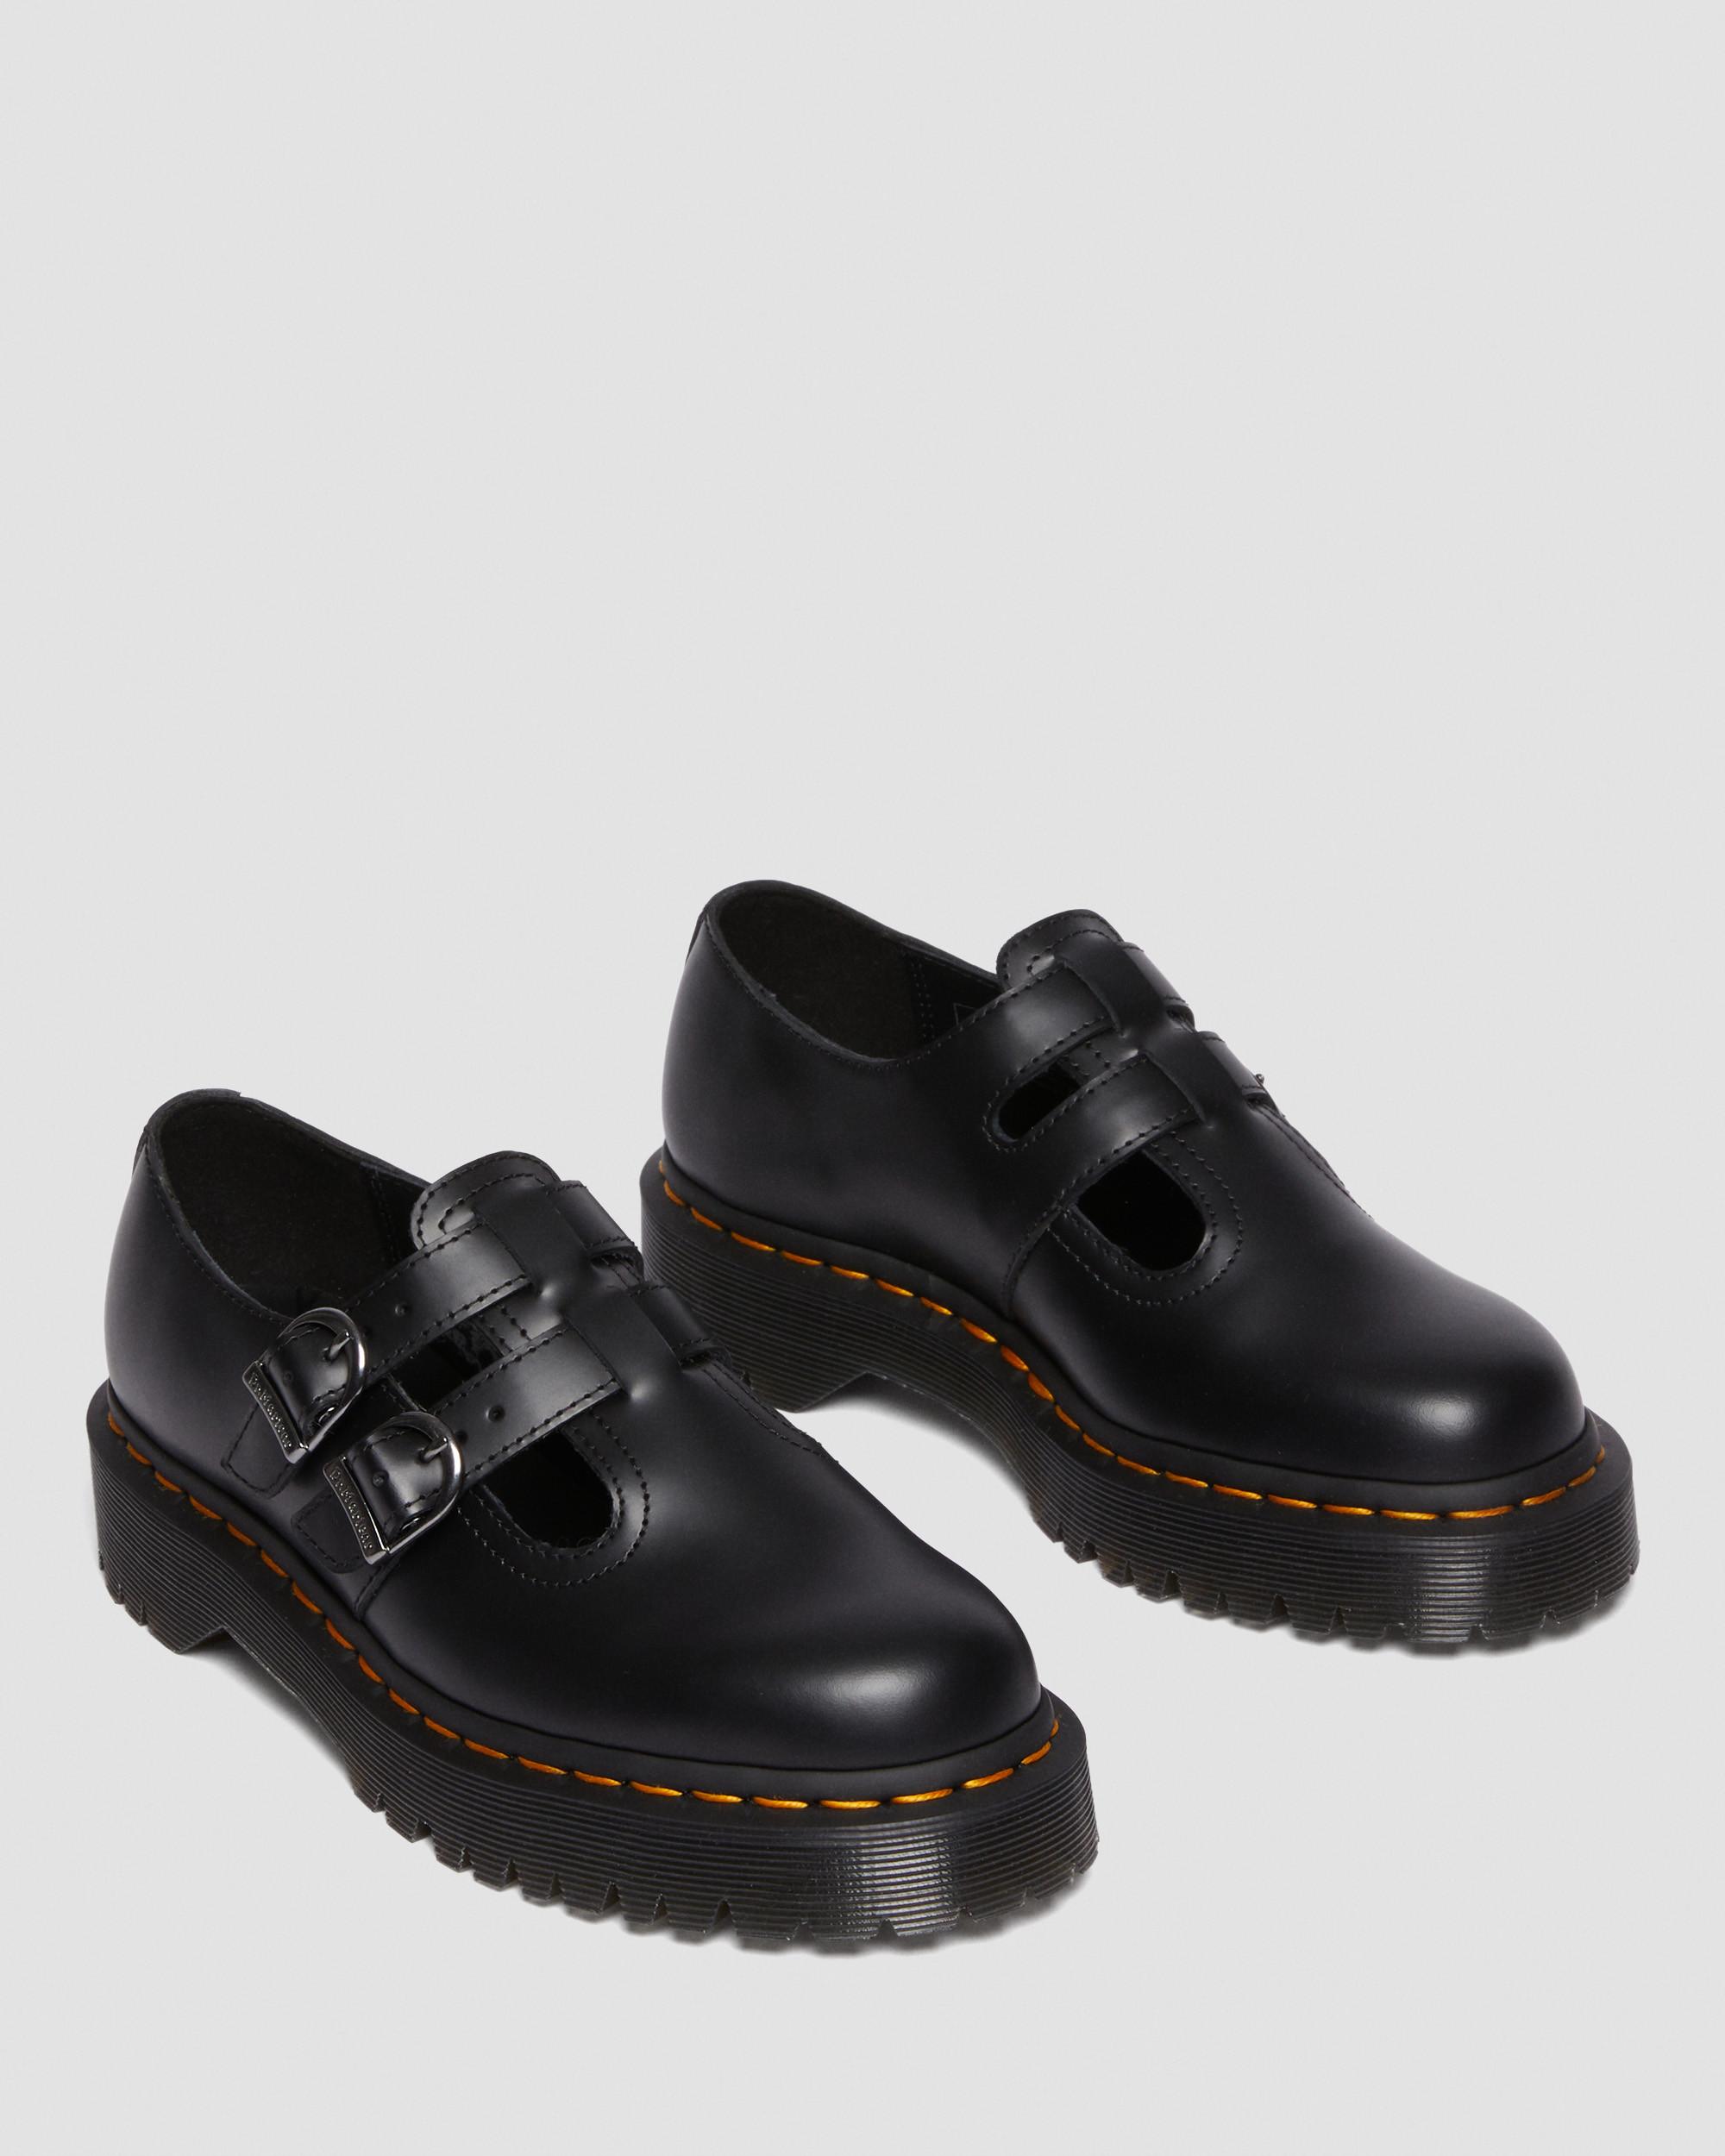 Dr. Martens 8065 Ii Bex Smooth Leather Platform Mary Jane Shoes In ...